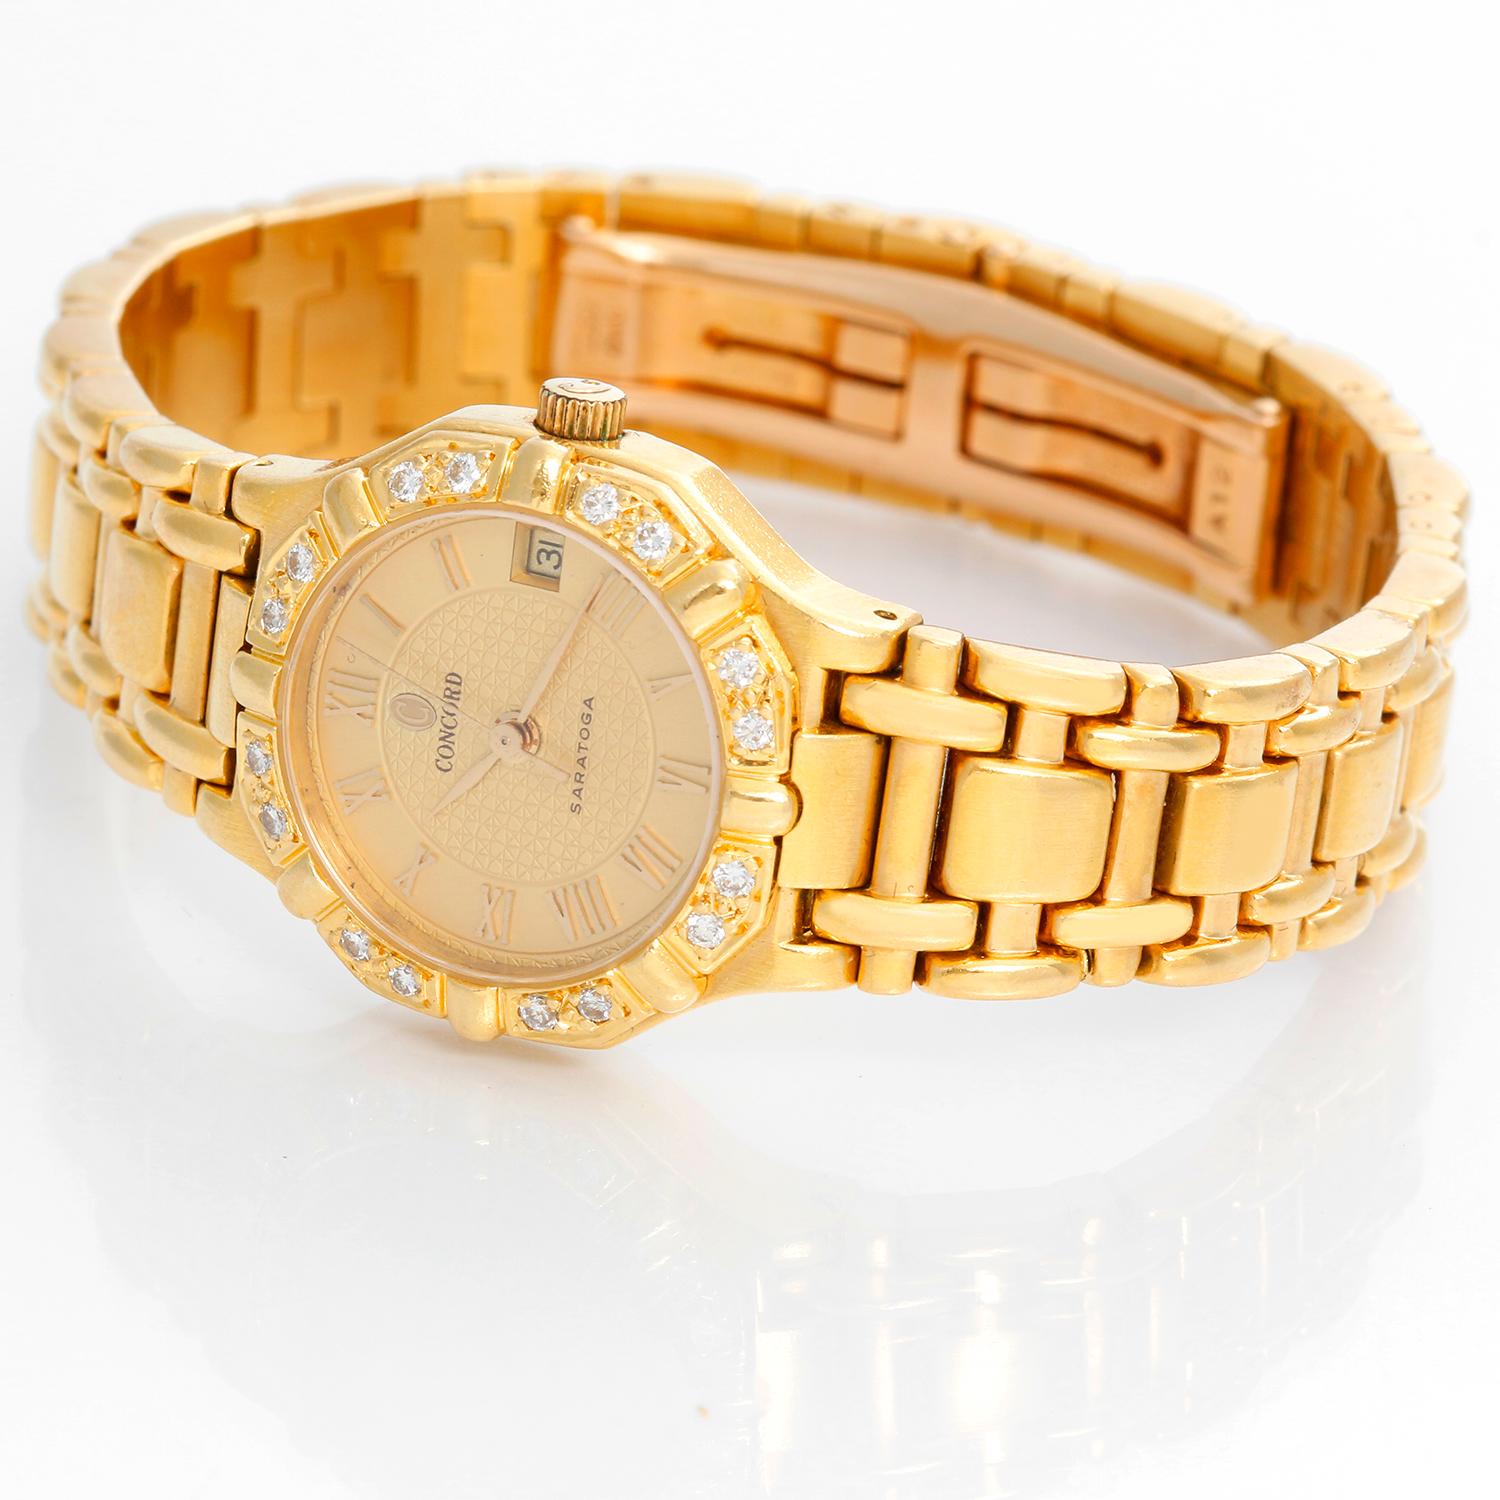 Concord Ladies 18K Yellow Gold  Saratoga Ladies Watch  - Quartz. 18K Yellow gold with diamond bezel ( 24 mm ) . Textured Champagne dial with Roman numerals . 18K Yellow gold link bracelet with deployant clasp . Pre-owned with custom box. Will fit a